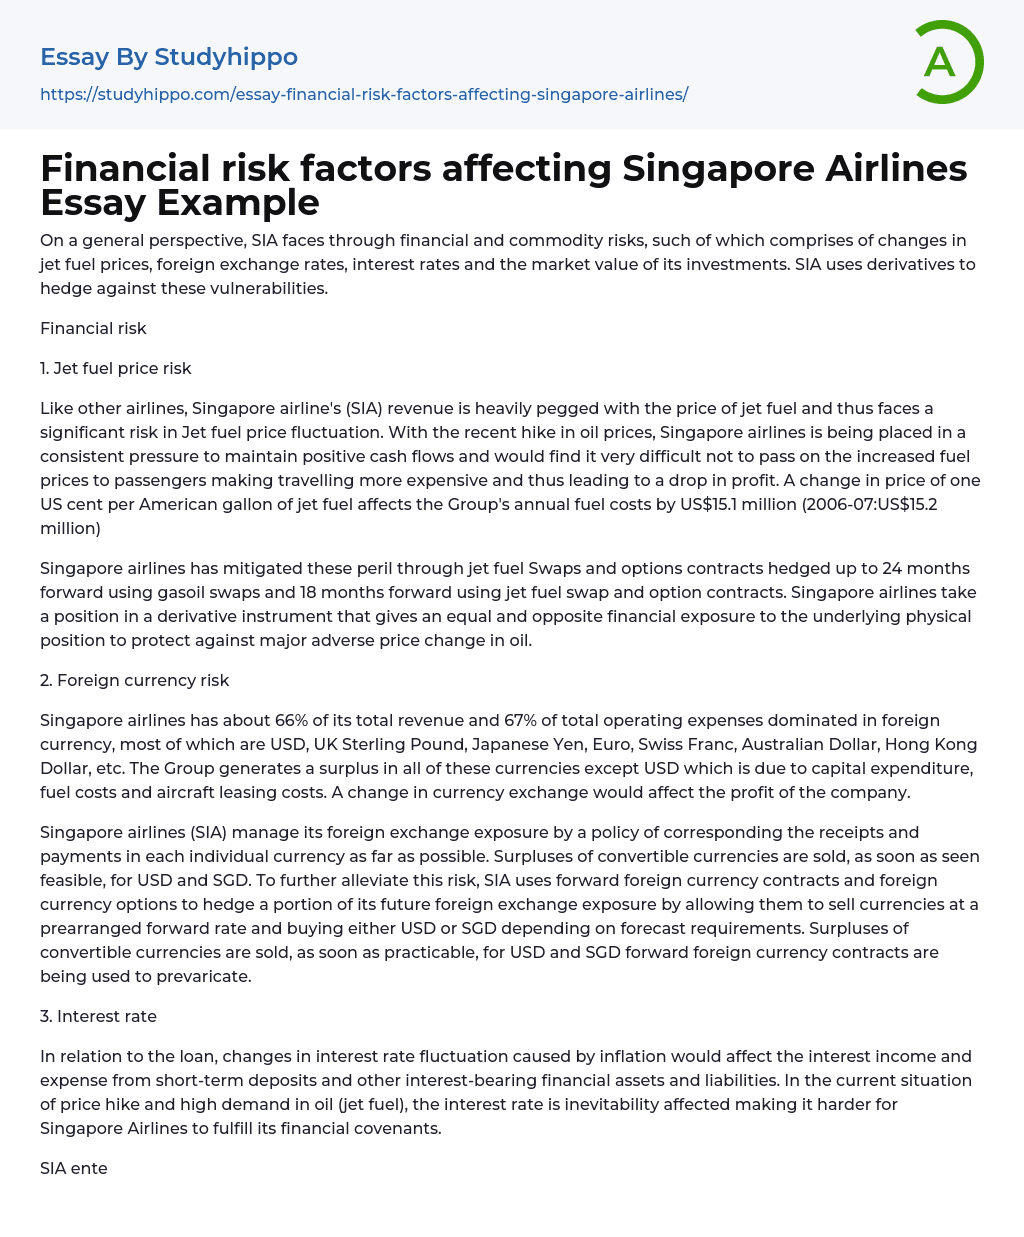 Financial risk factors affecting Singapore Airlines Essay Example